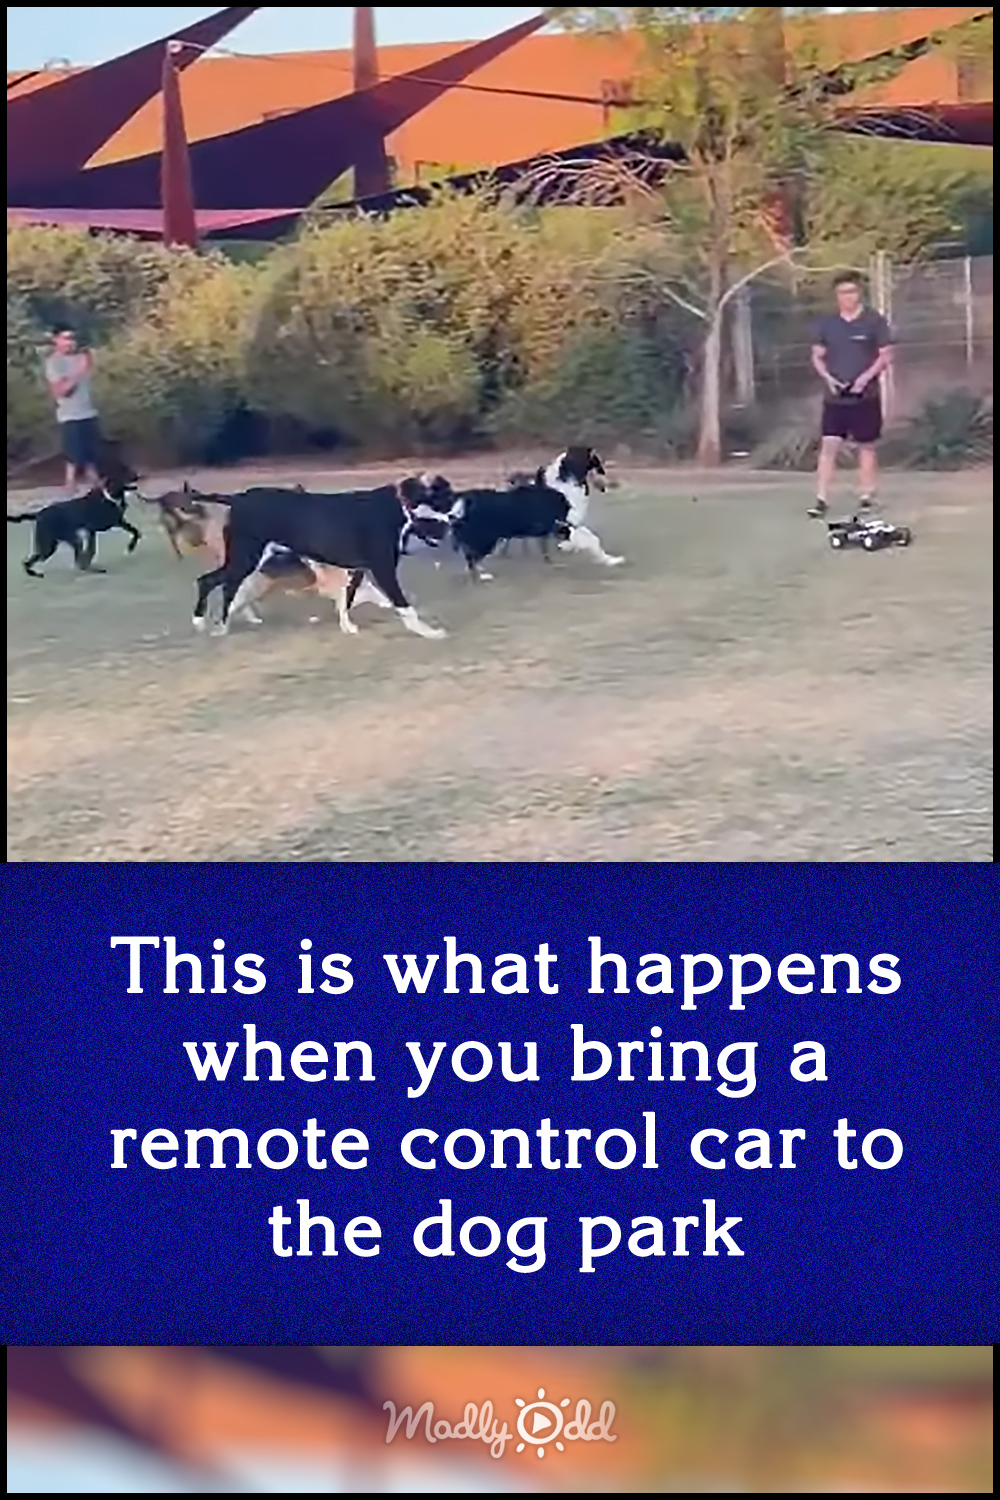 This is what happens when you bring a remote control car to the dog park